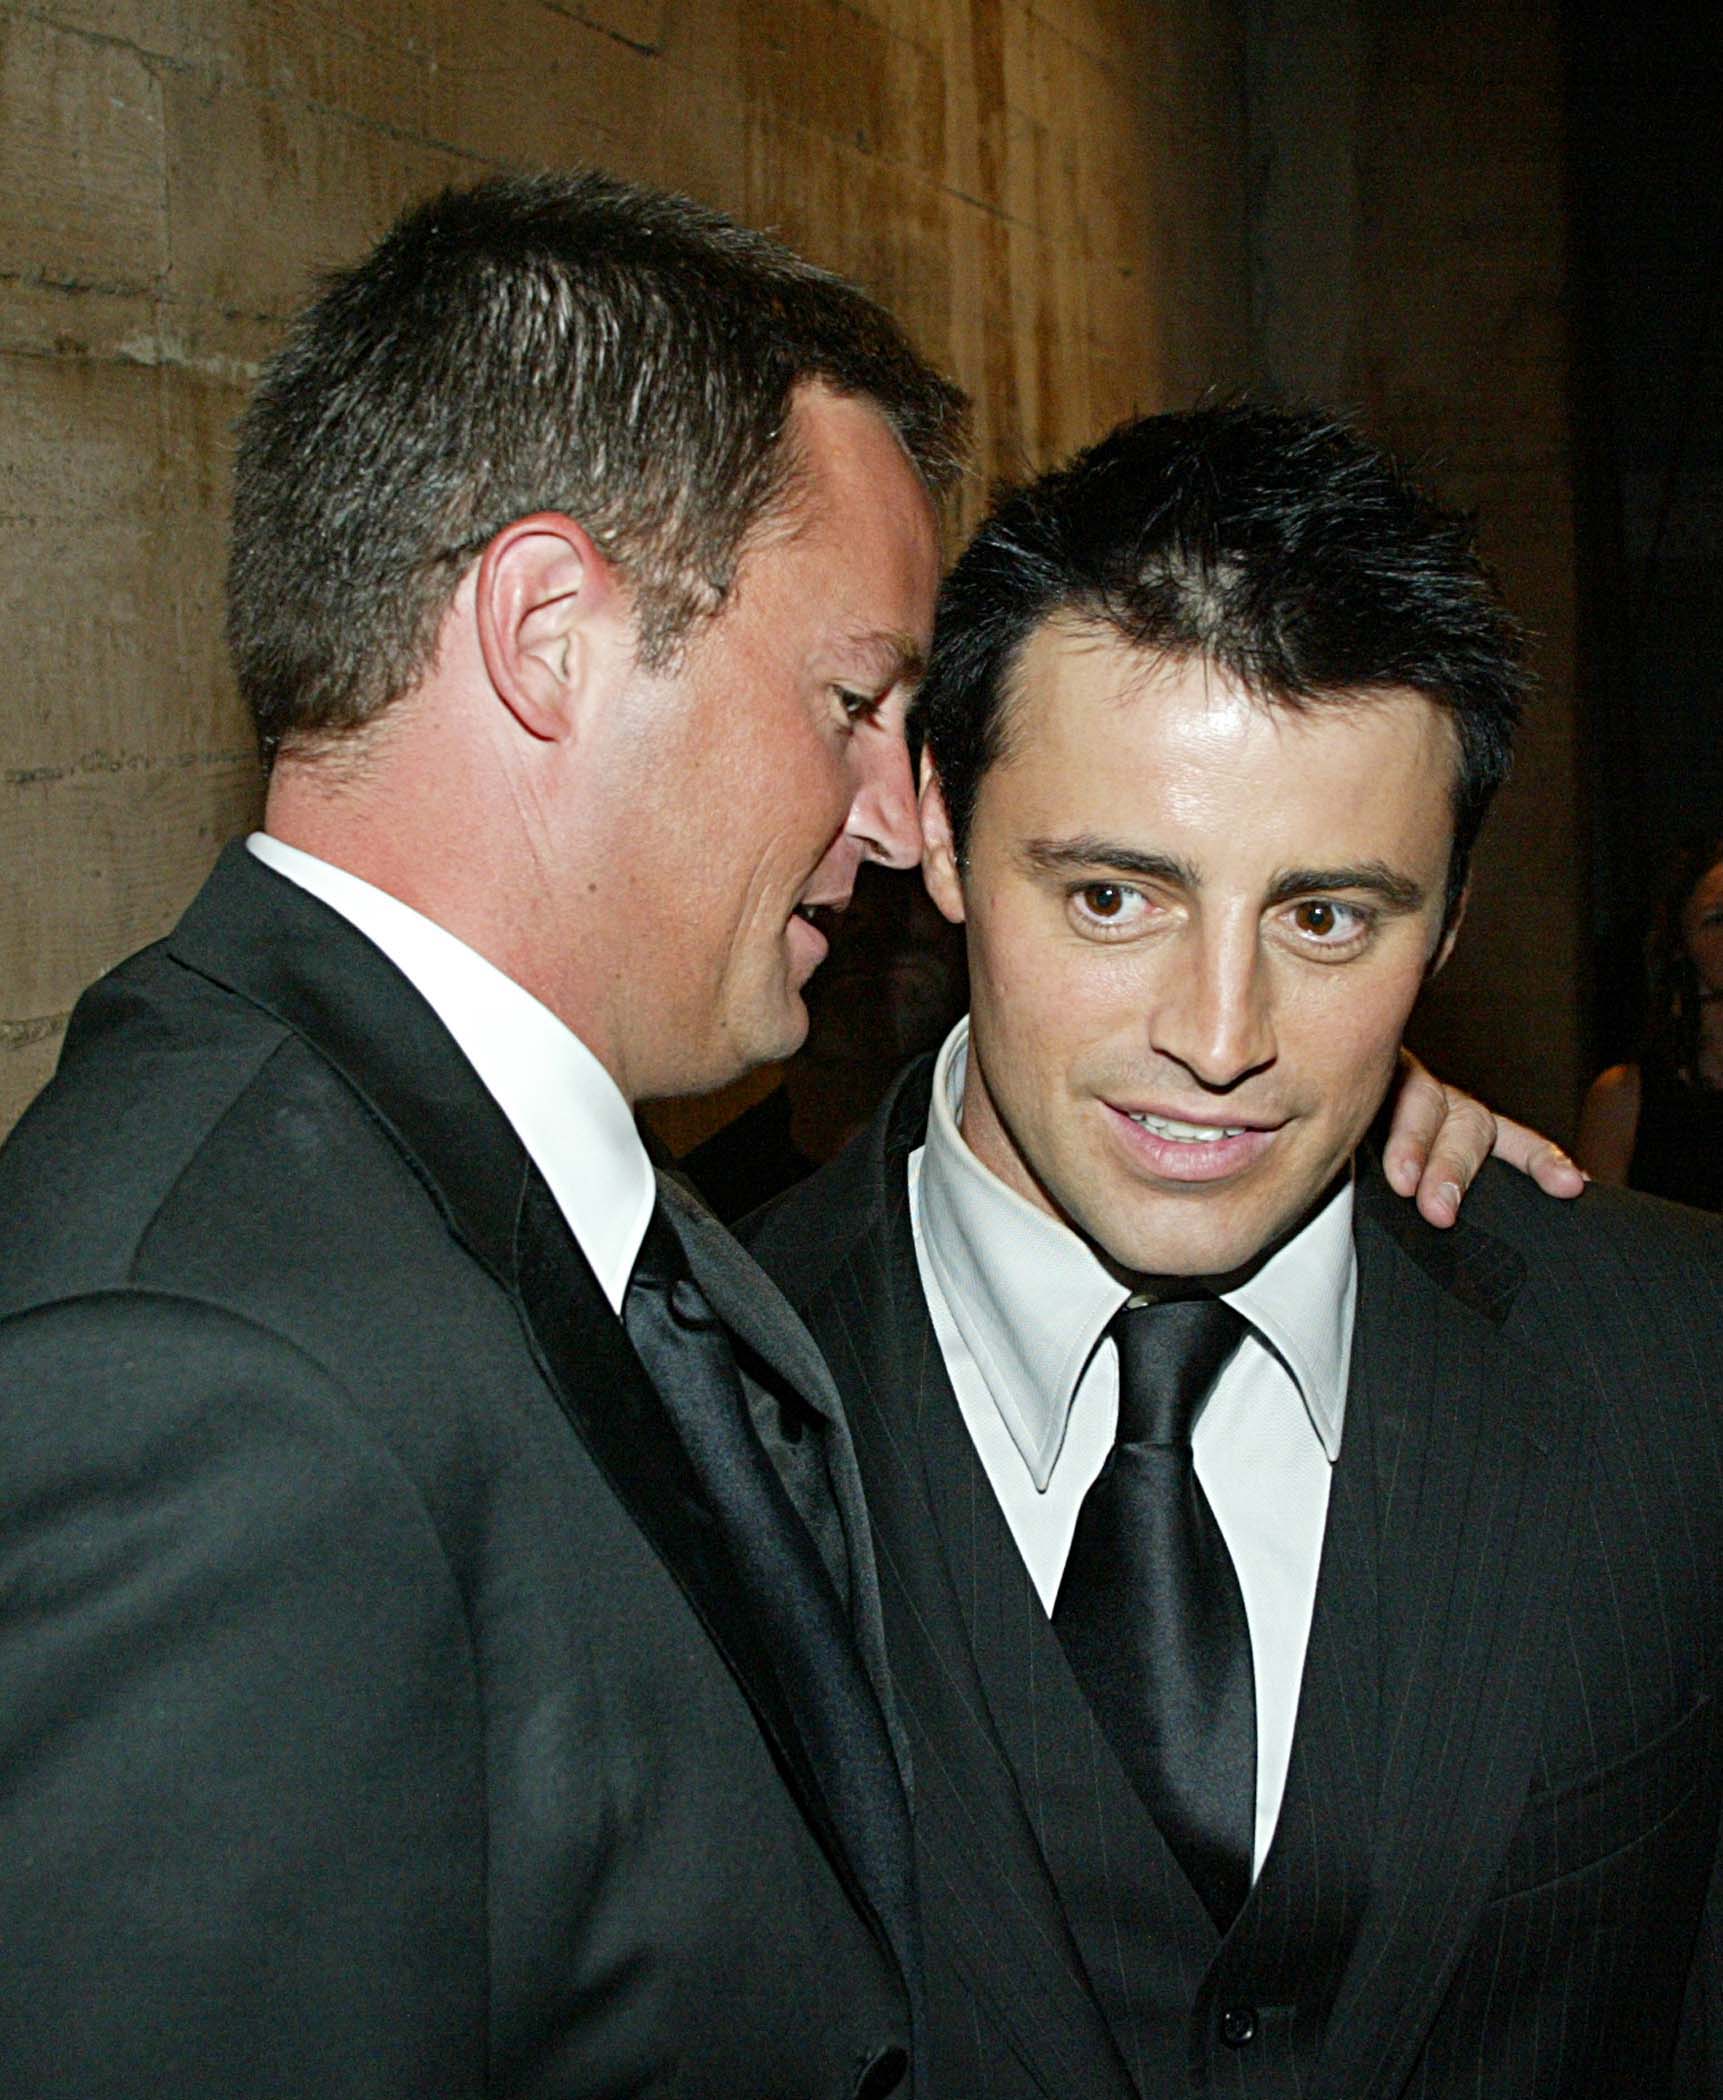 Matthew Perry and Matt LeBlanc at the 54th Annual Primetime Emmy Awards in 2002 | Source: Getty Images